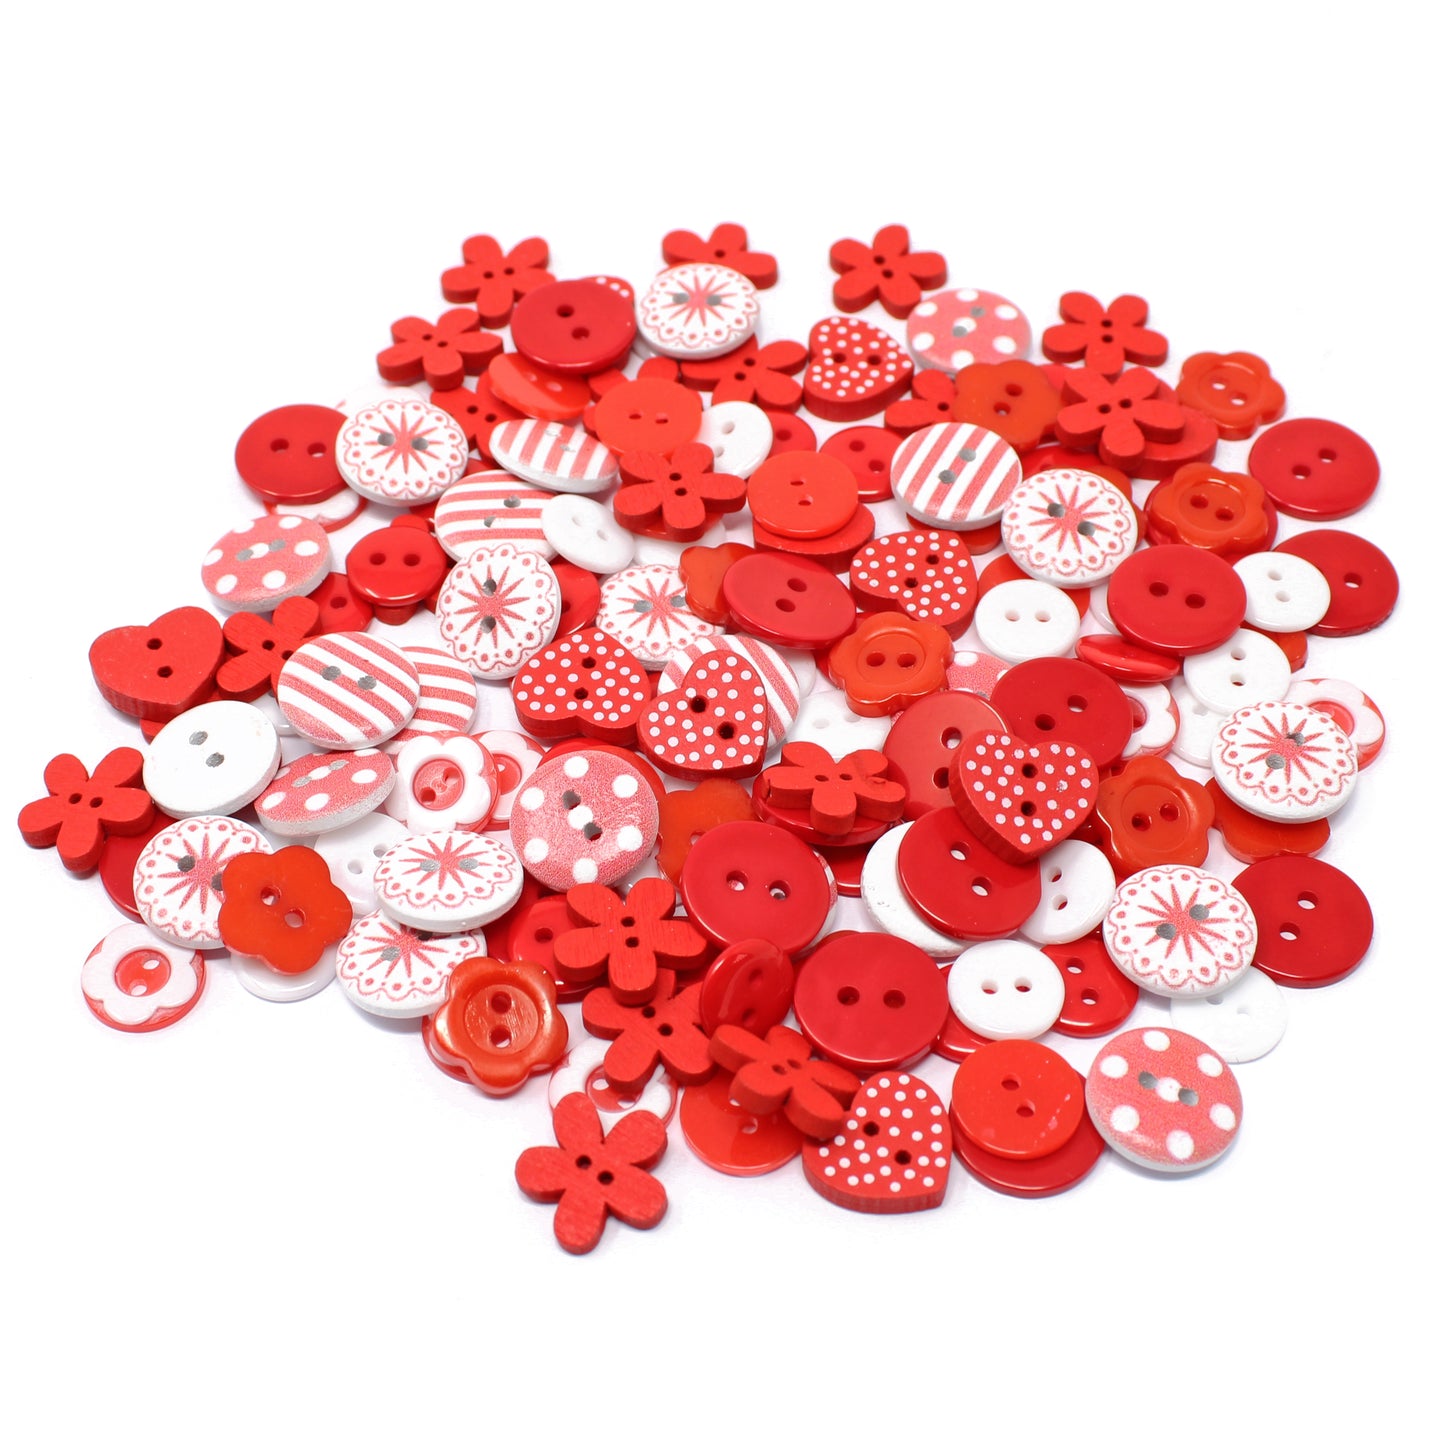 Red 150 Mix Wood Acrylic & Resin Buttons